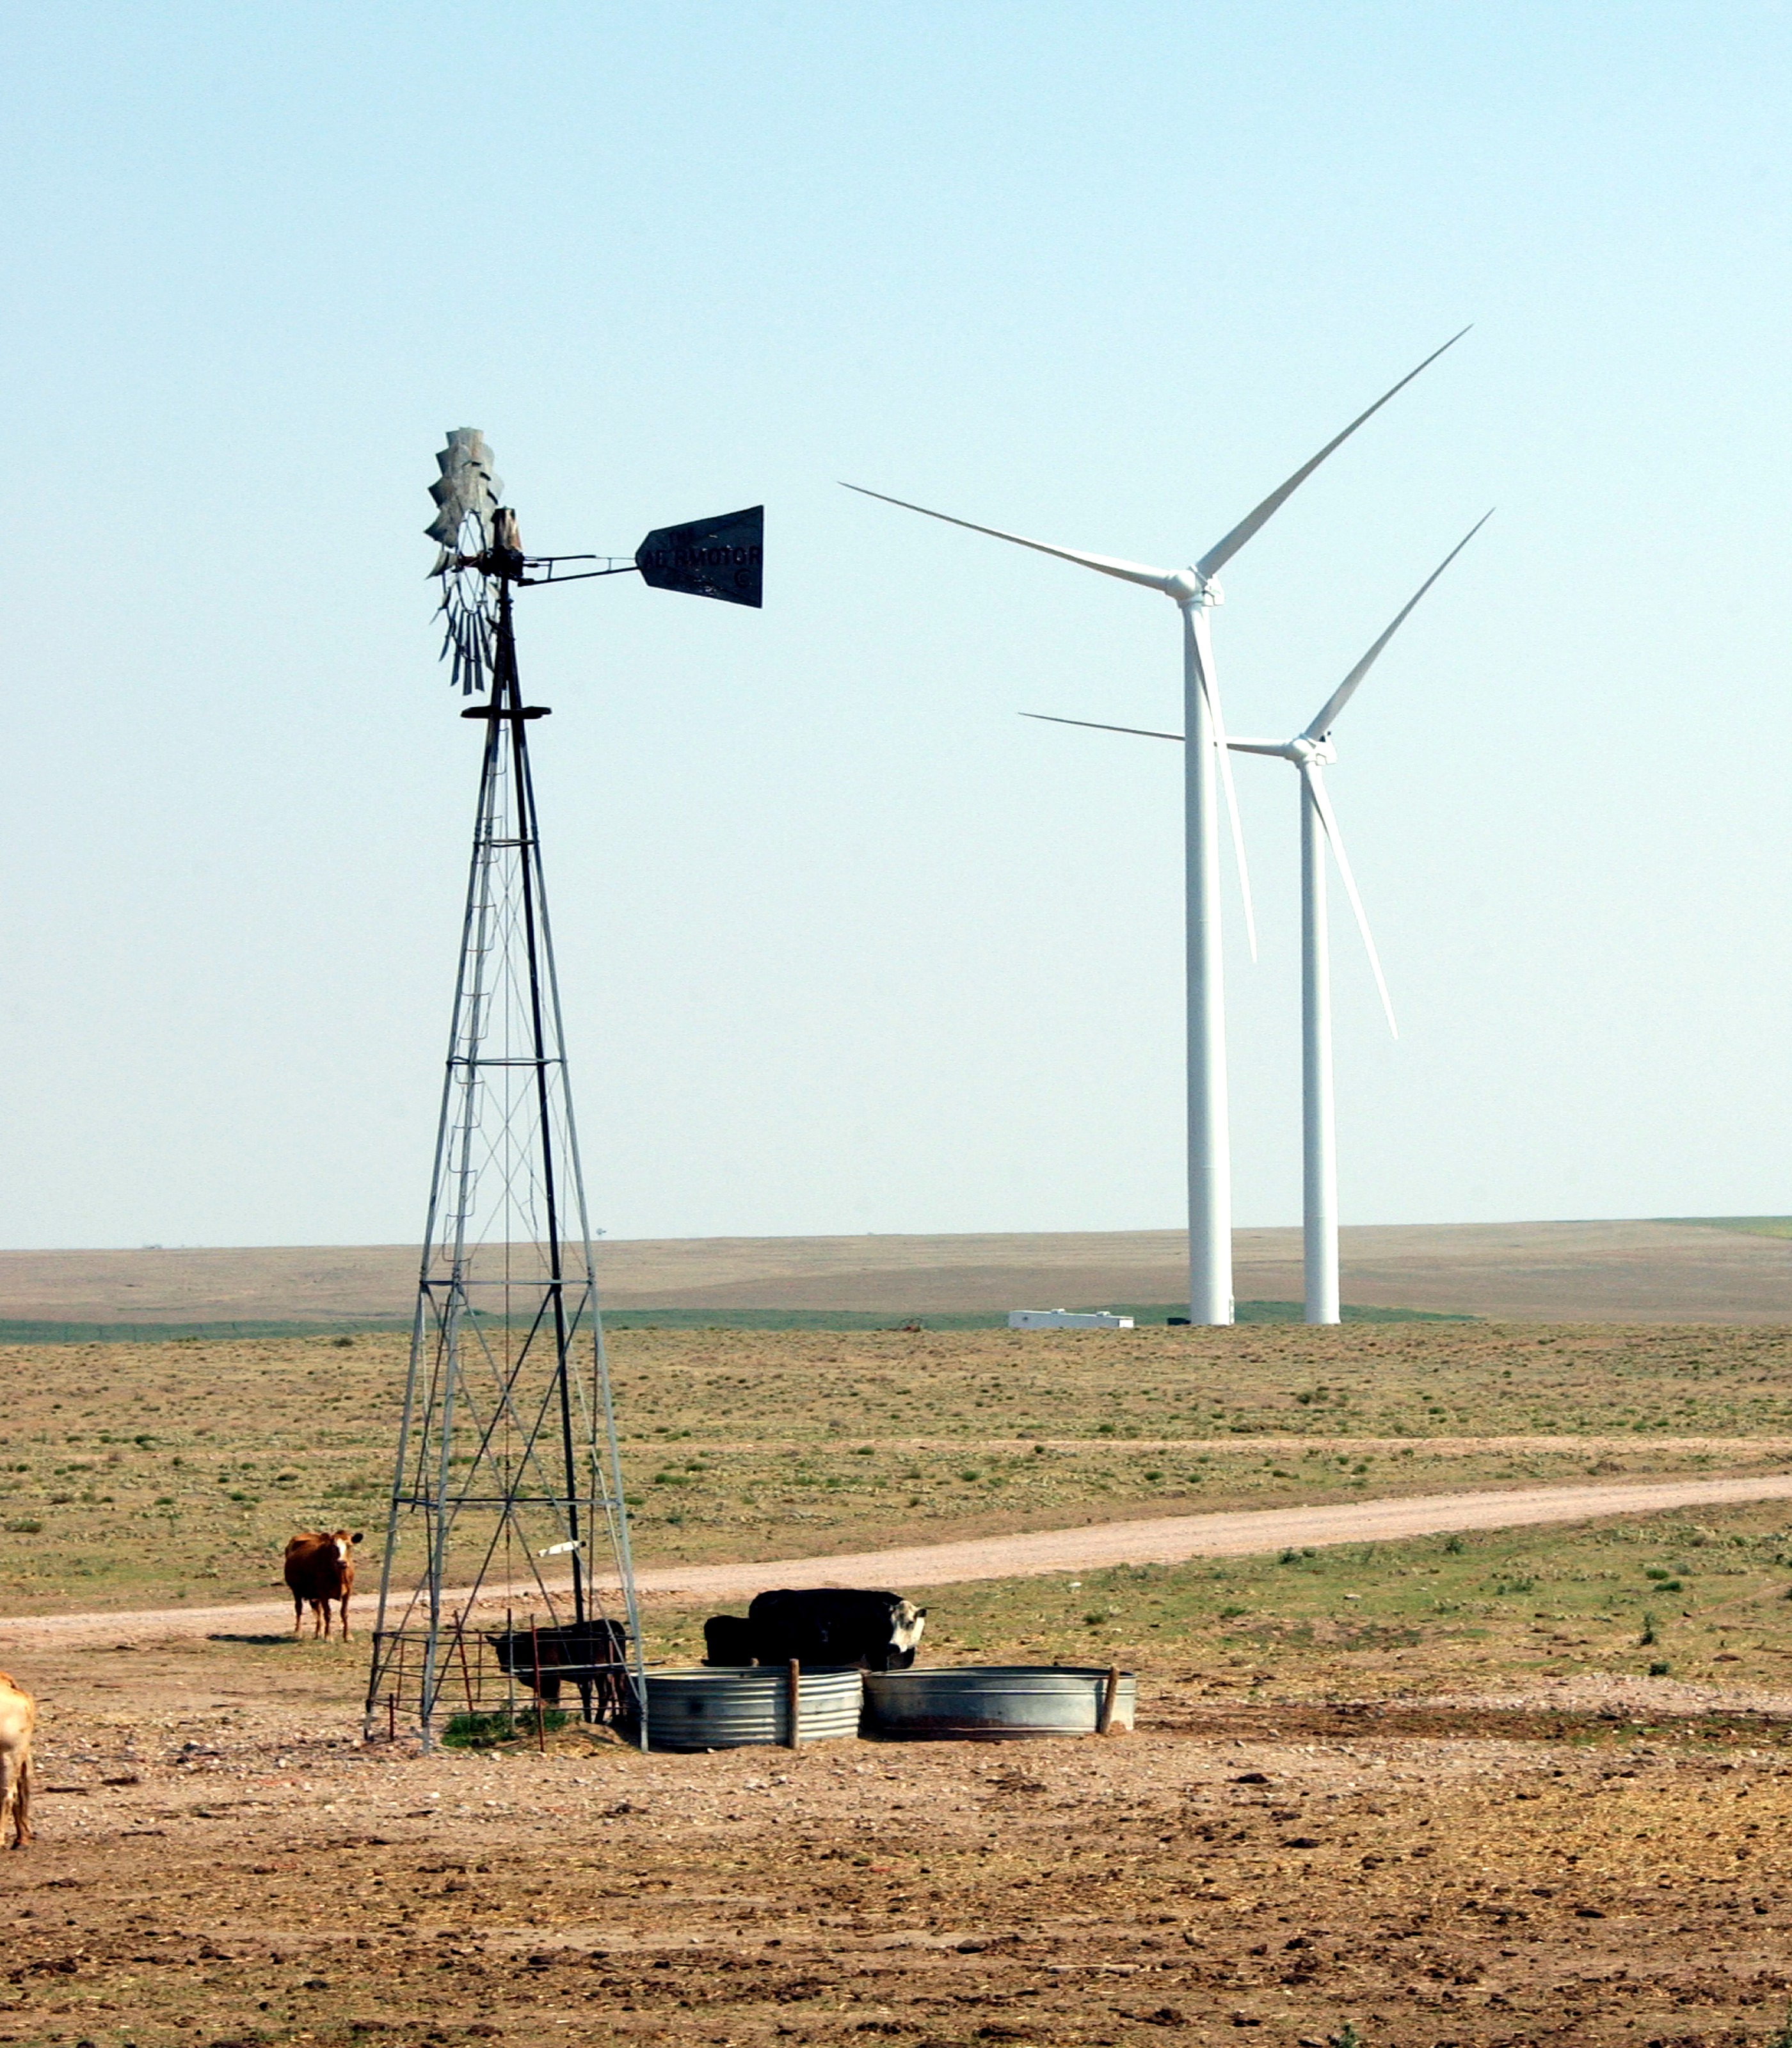 Two wind turbines in a field behind cows, food troughs, and an old-fashioned windmill.